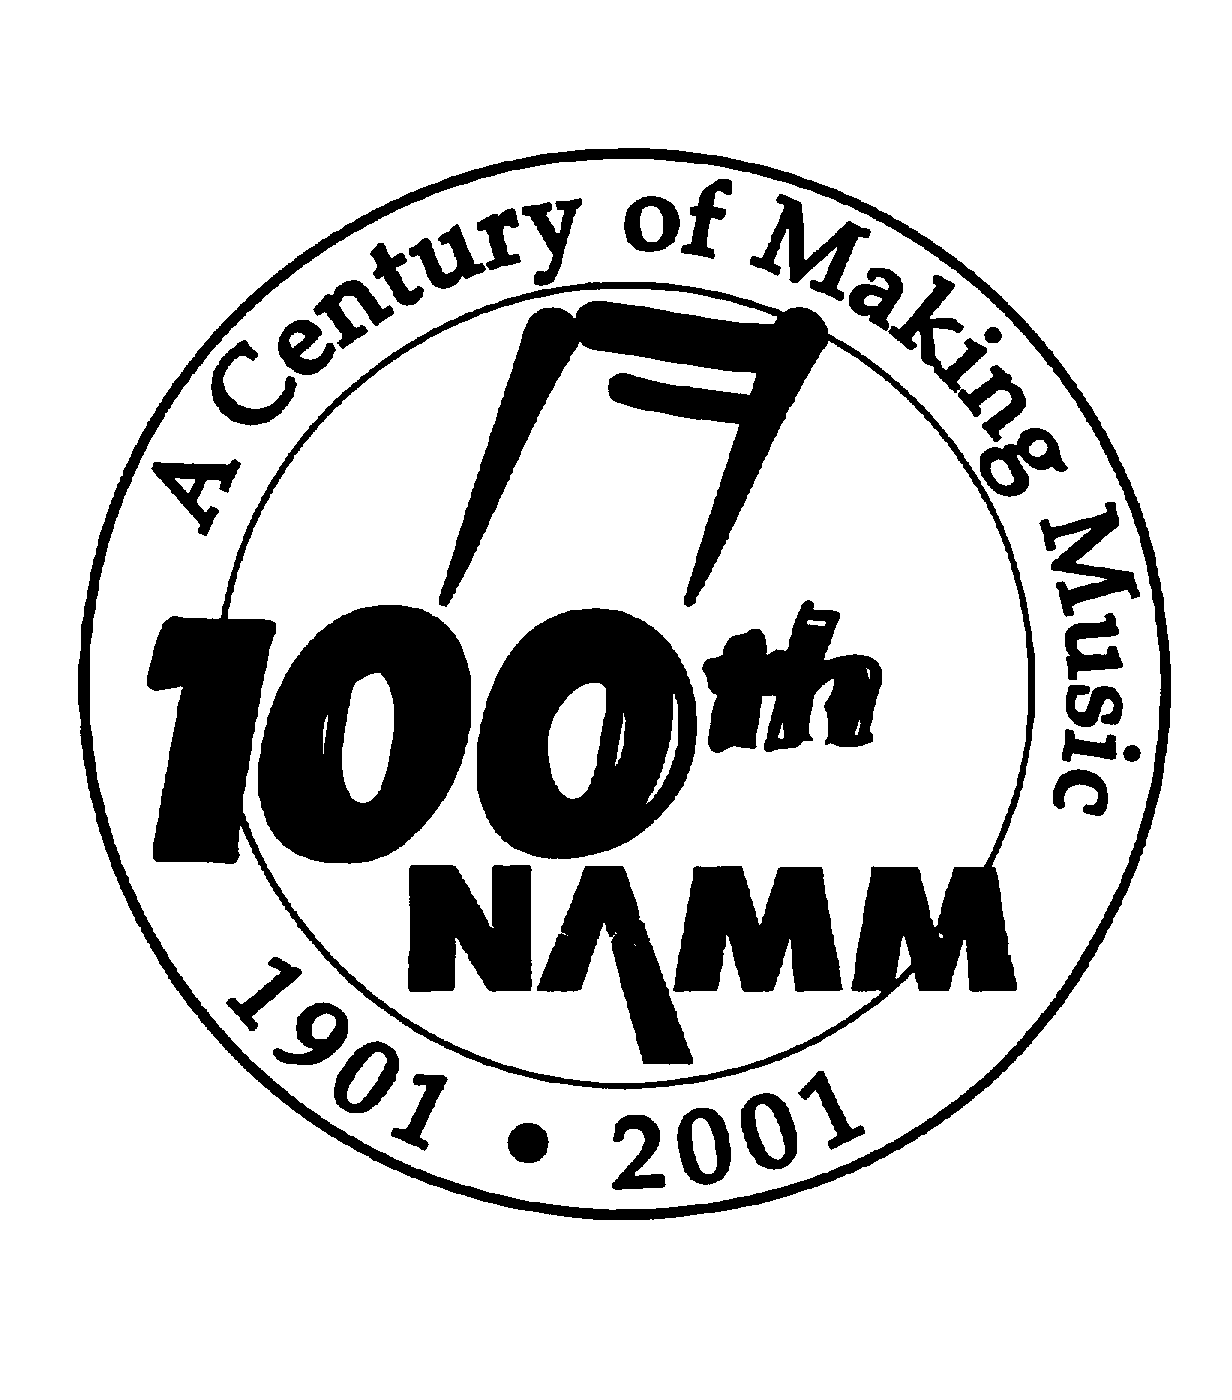  A CENTURY OF MAKING MUSIC 100TH NAMM 1901 2001